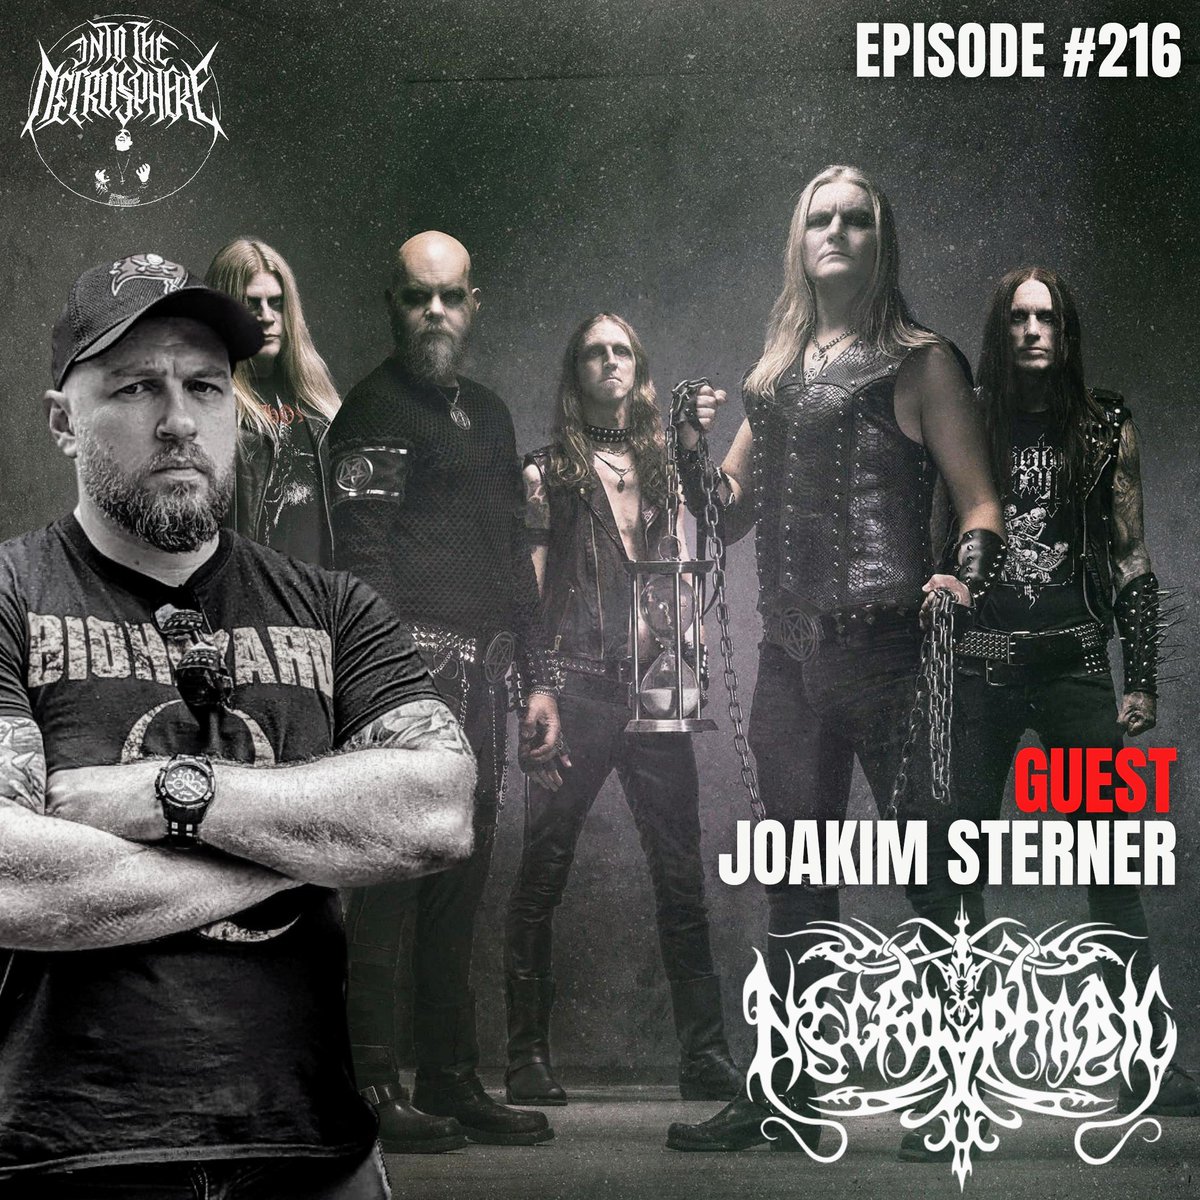 Joakim Sterner of Swedish blackened death metal legends, @necrophobic_666, joins me this week to discuss their tenth album, “In The Twilight Grey”, reminisce over the halcyon days of the Swedish death and black metal underground, and to reveal how and why he took up drumming